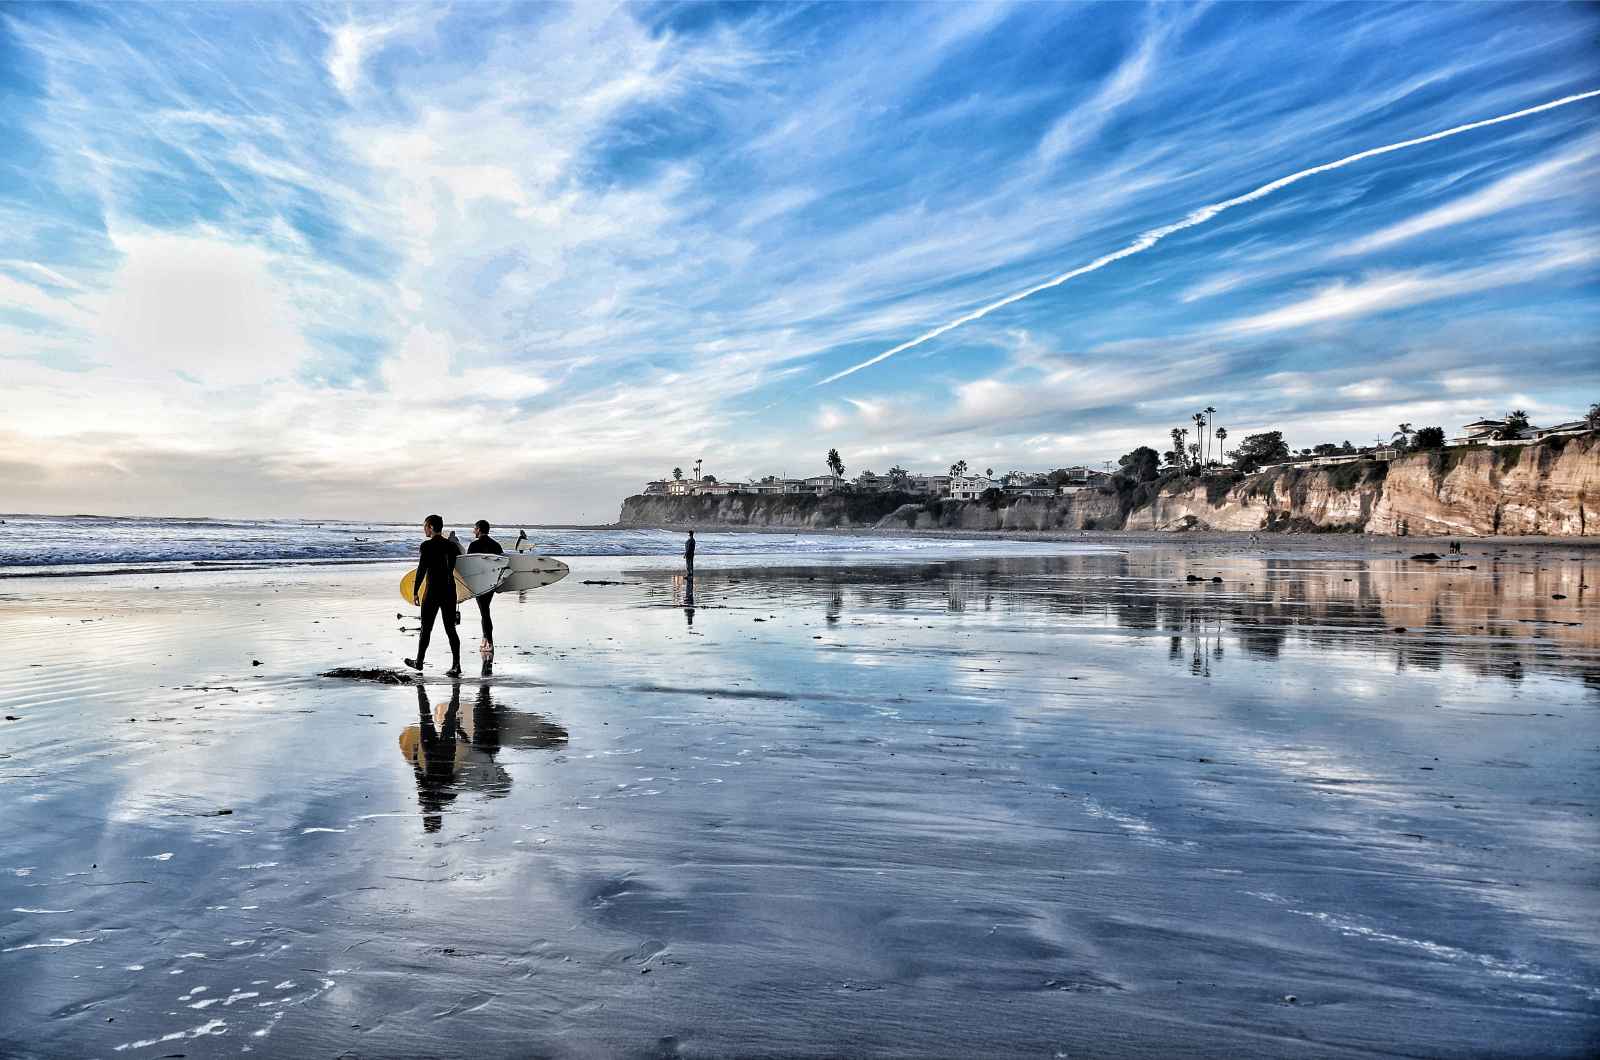 Things to Do in Venice Beach California Go Surfing